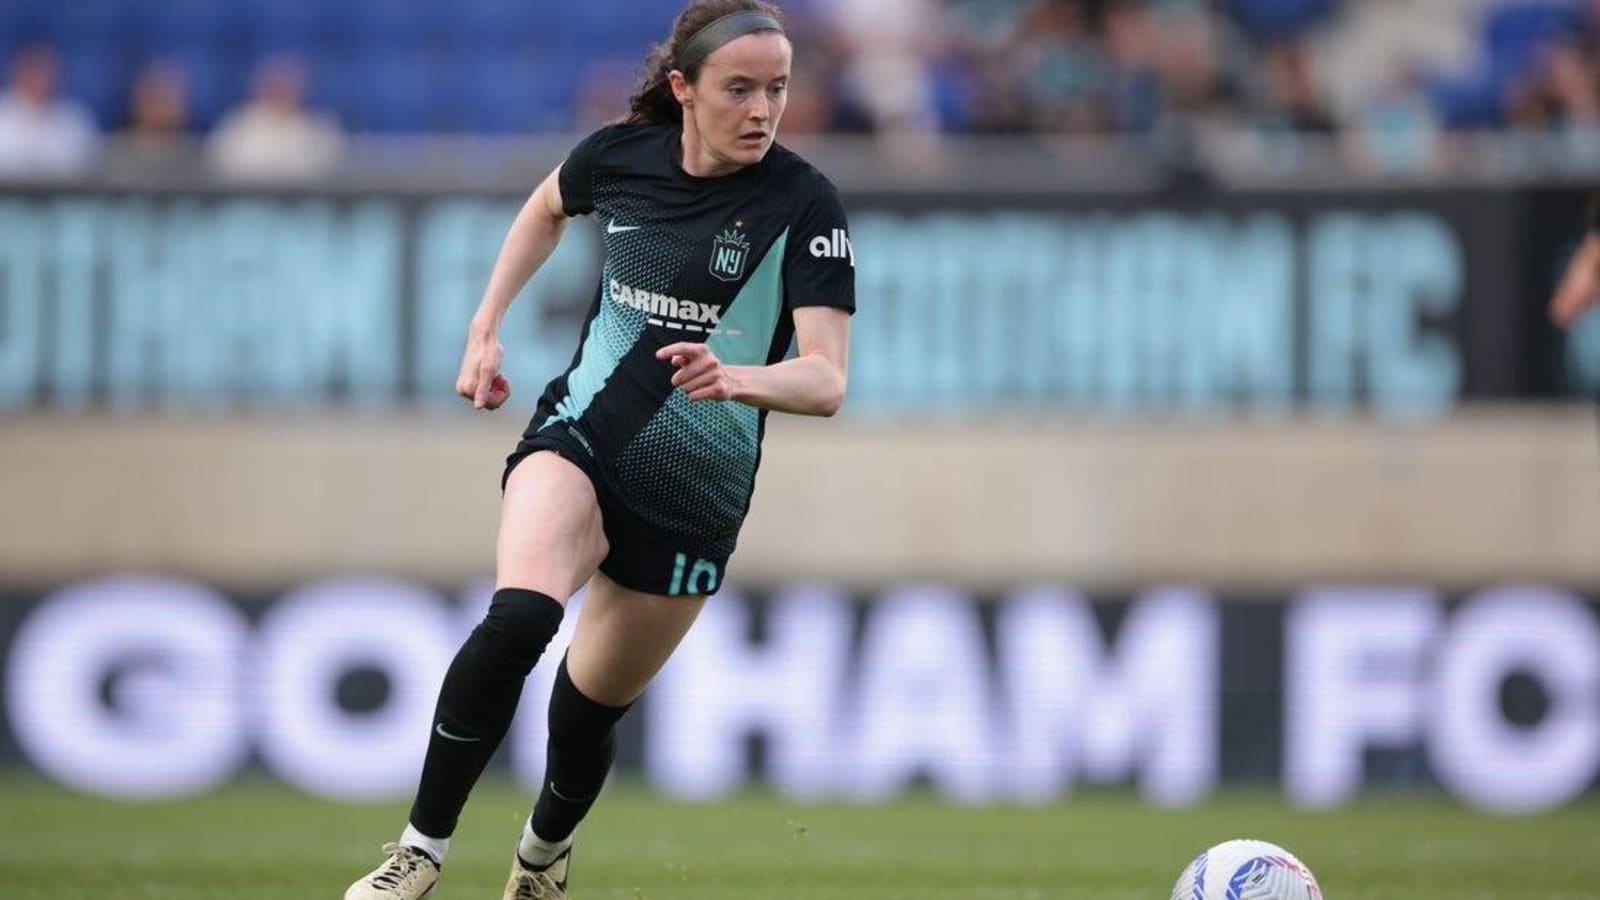 Rose Lavelle scores in Gotham debut to salvage draw with Louisville